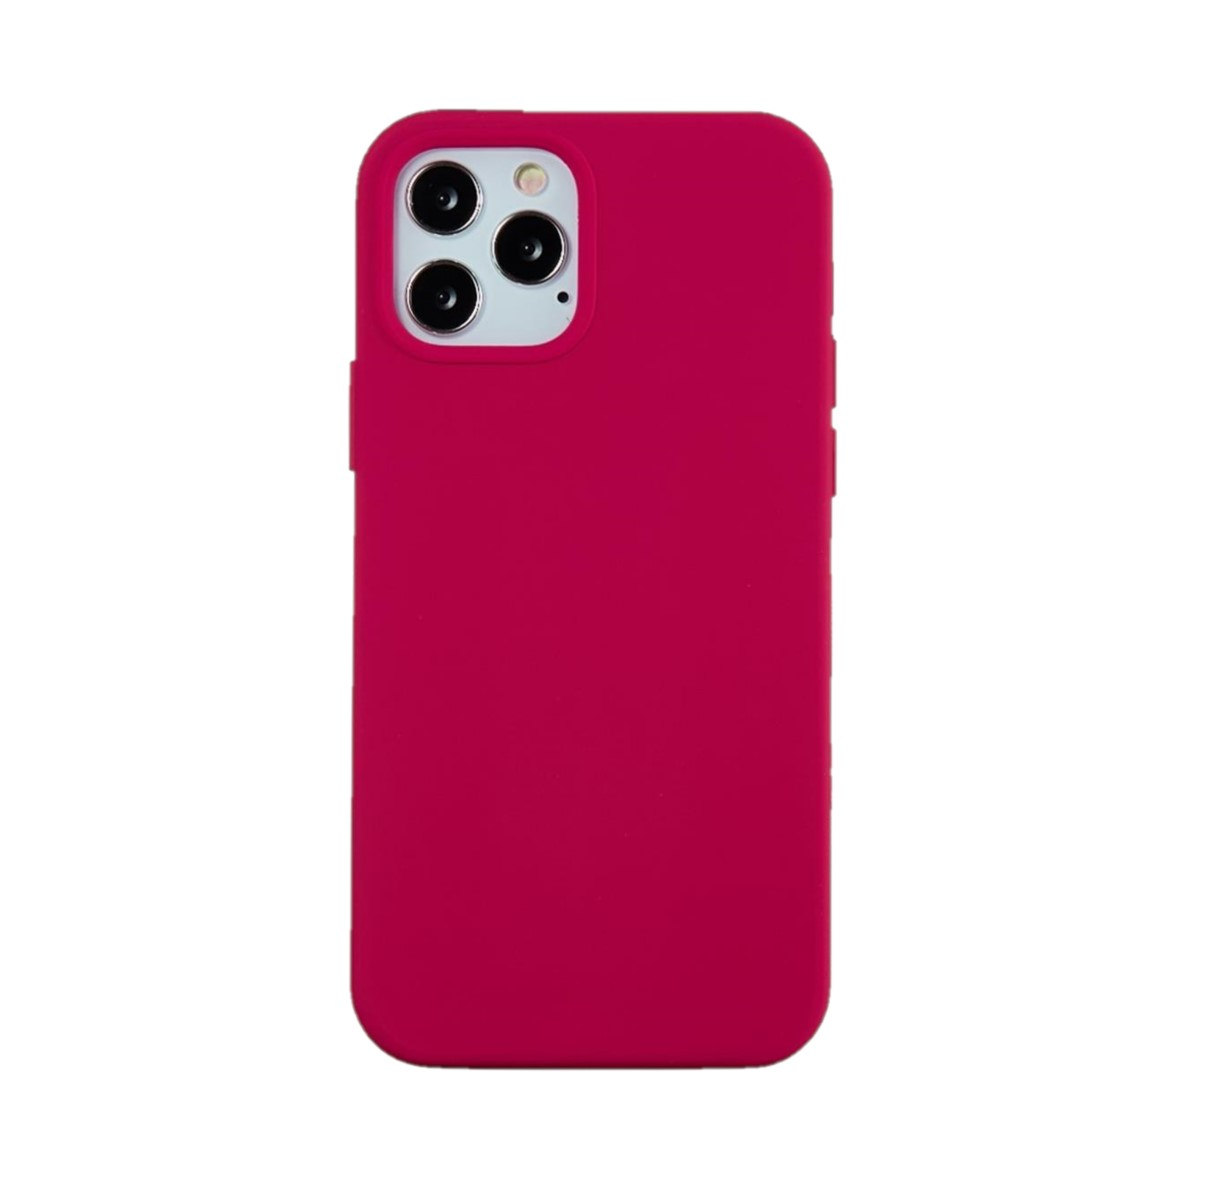 COVERKINGZ Handycase aus Rot Zoll], Max [6,7 Apple, Pro iPhone 13 Backcover, Silikon